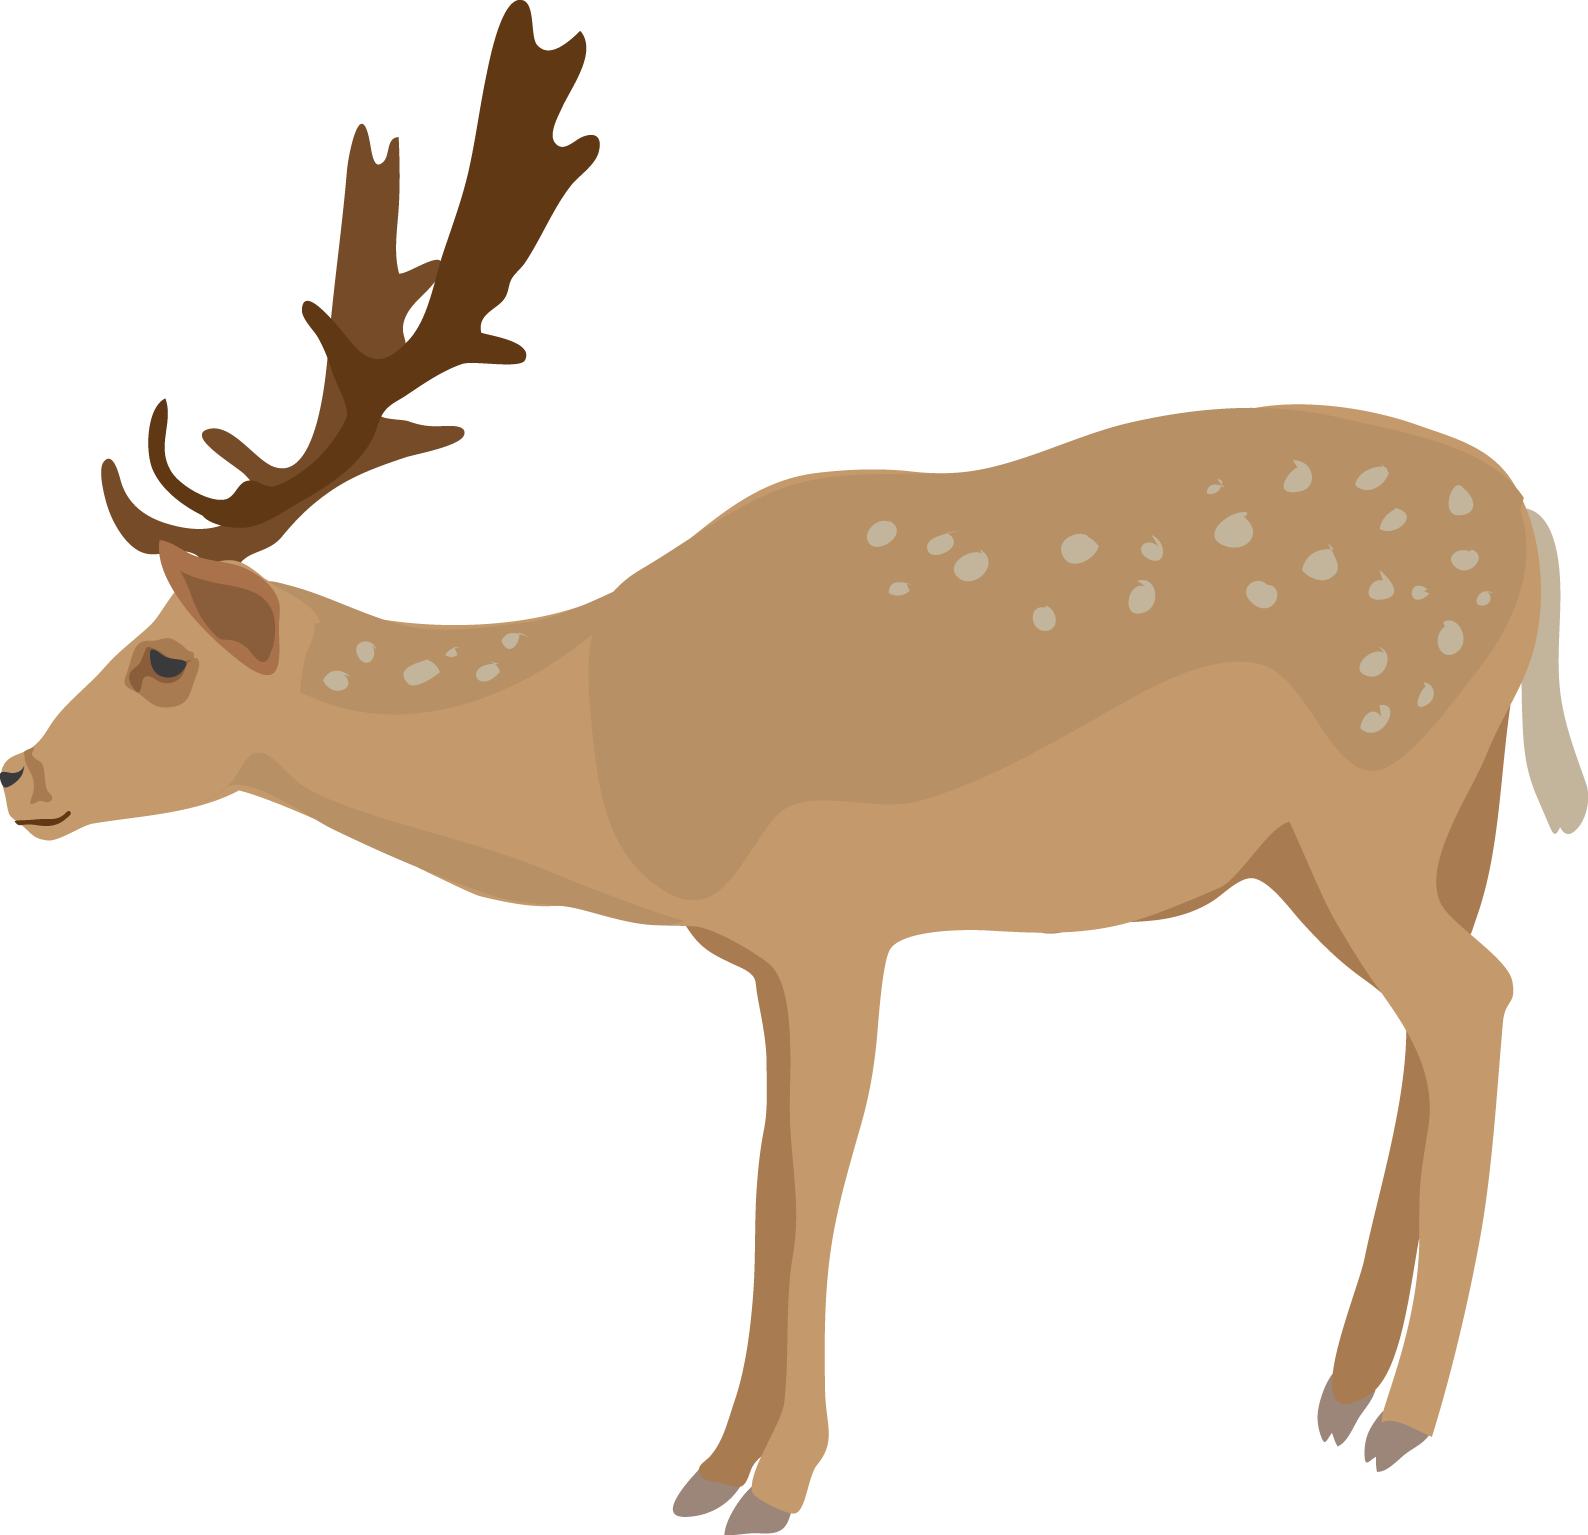 Deer Clipart To Download | Clipart Panda - Free Clipart Images